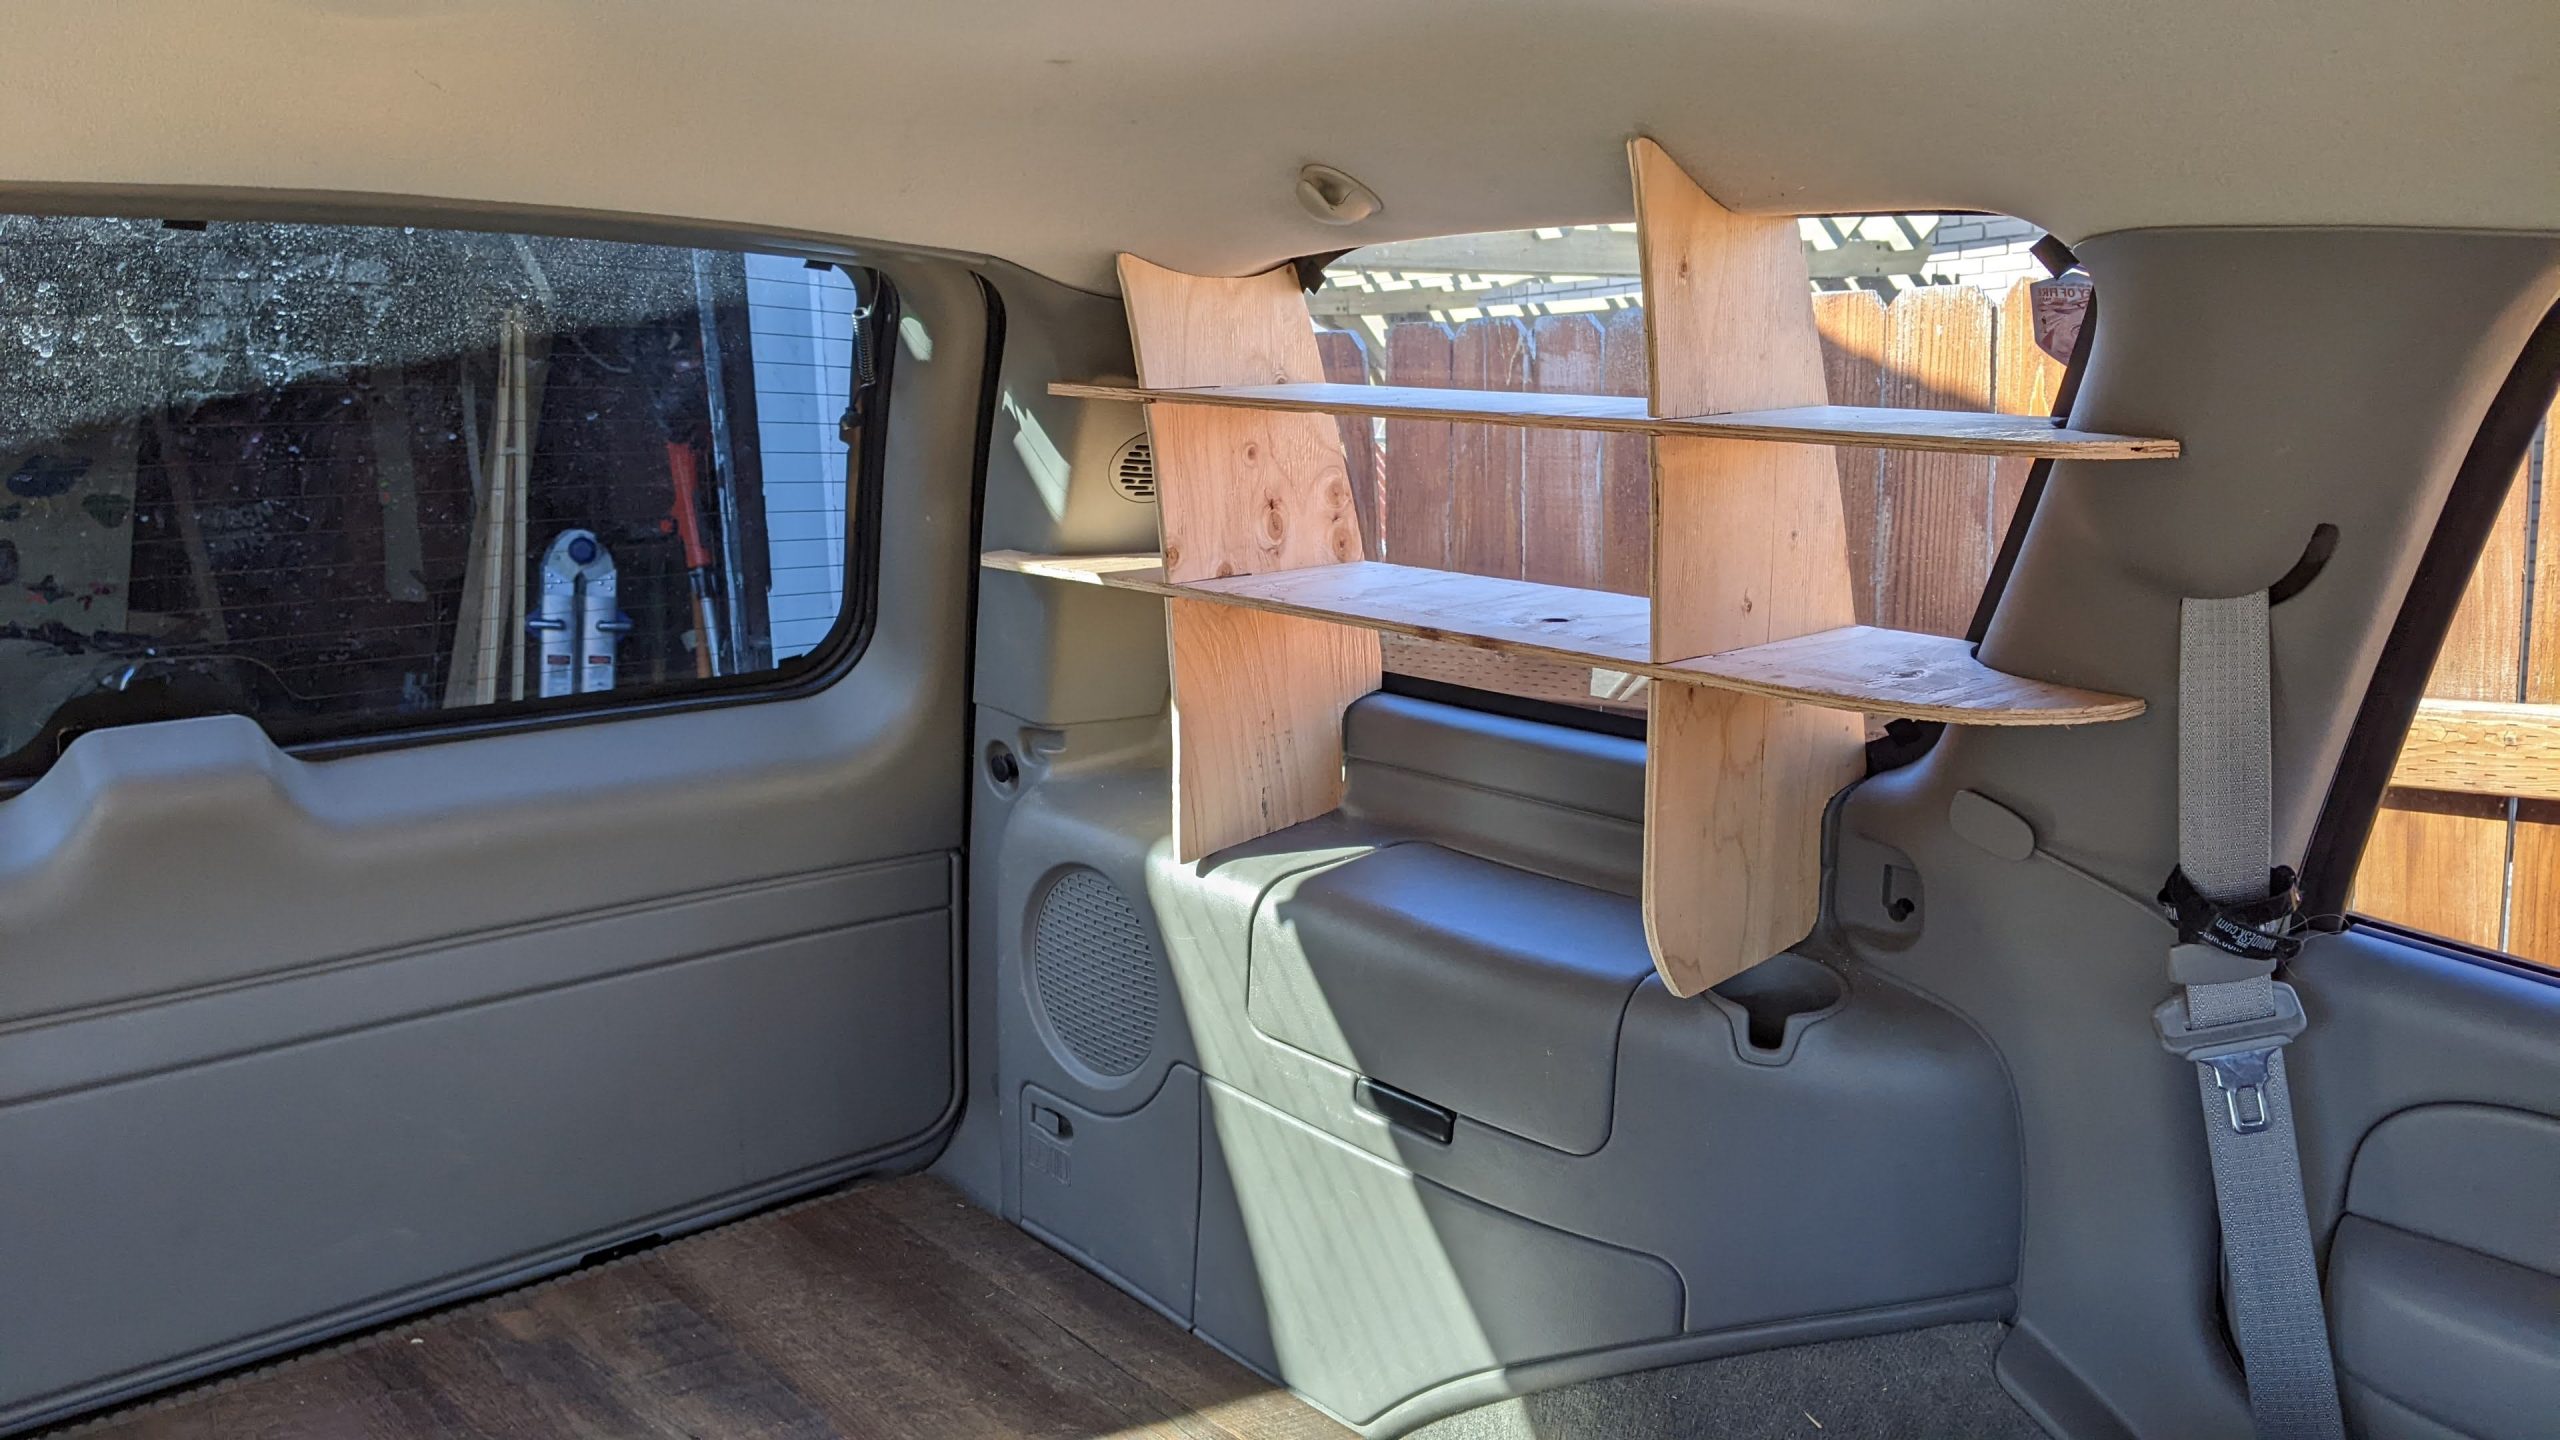 You are currently viewing Storage Shelves in my Chevy Tahoe Truck Camper